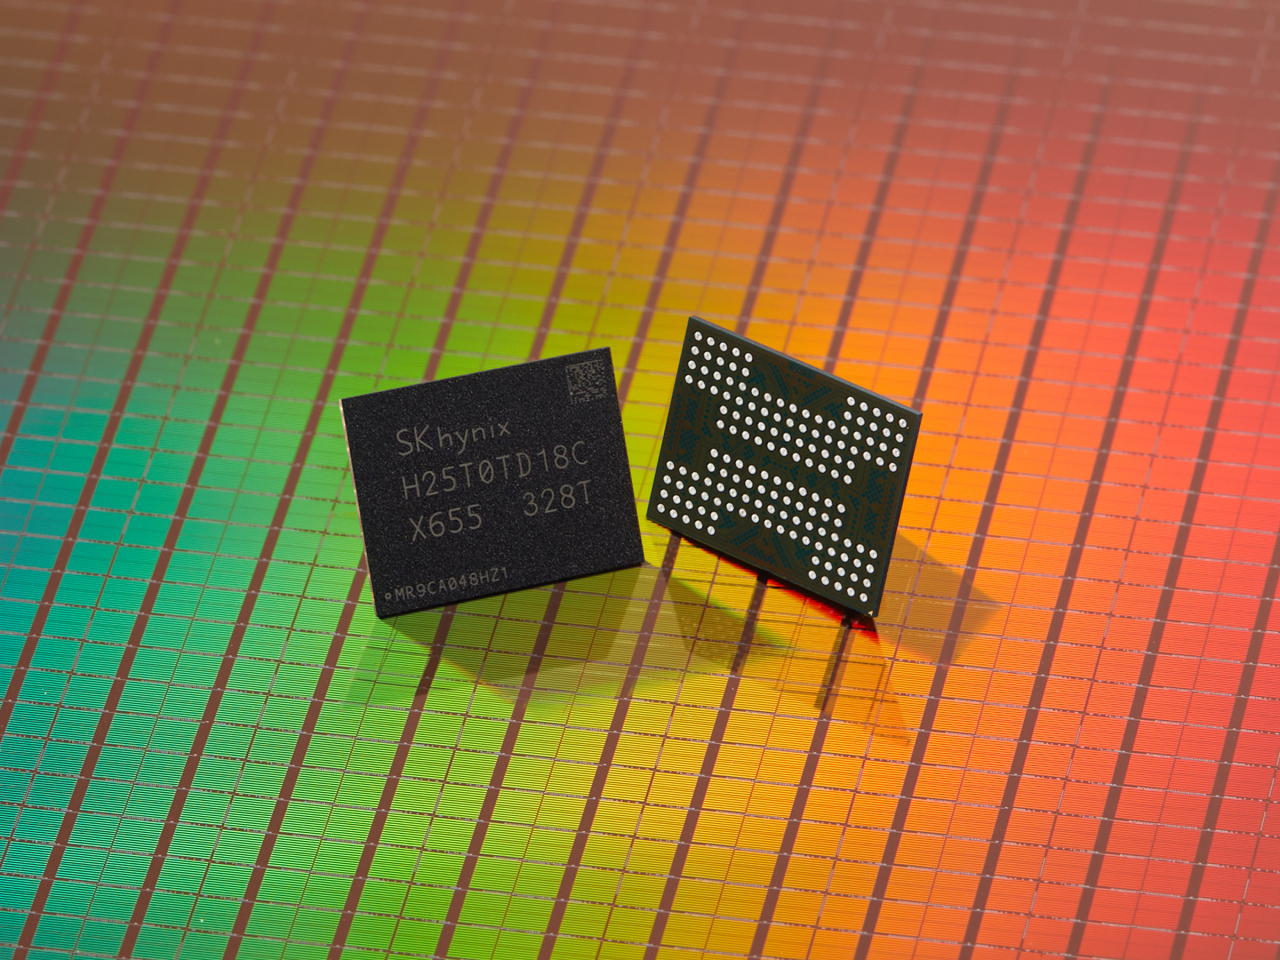 World's first 321-layer NAND